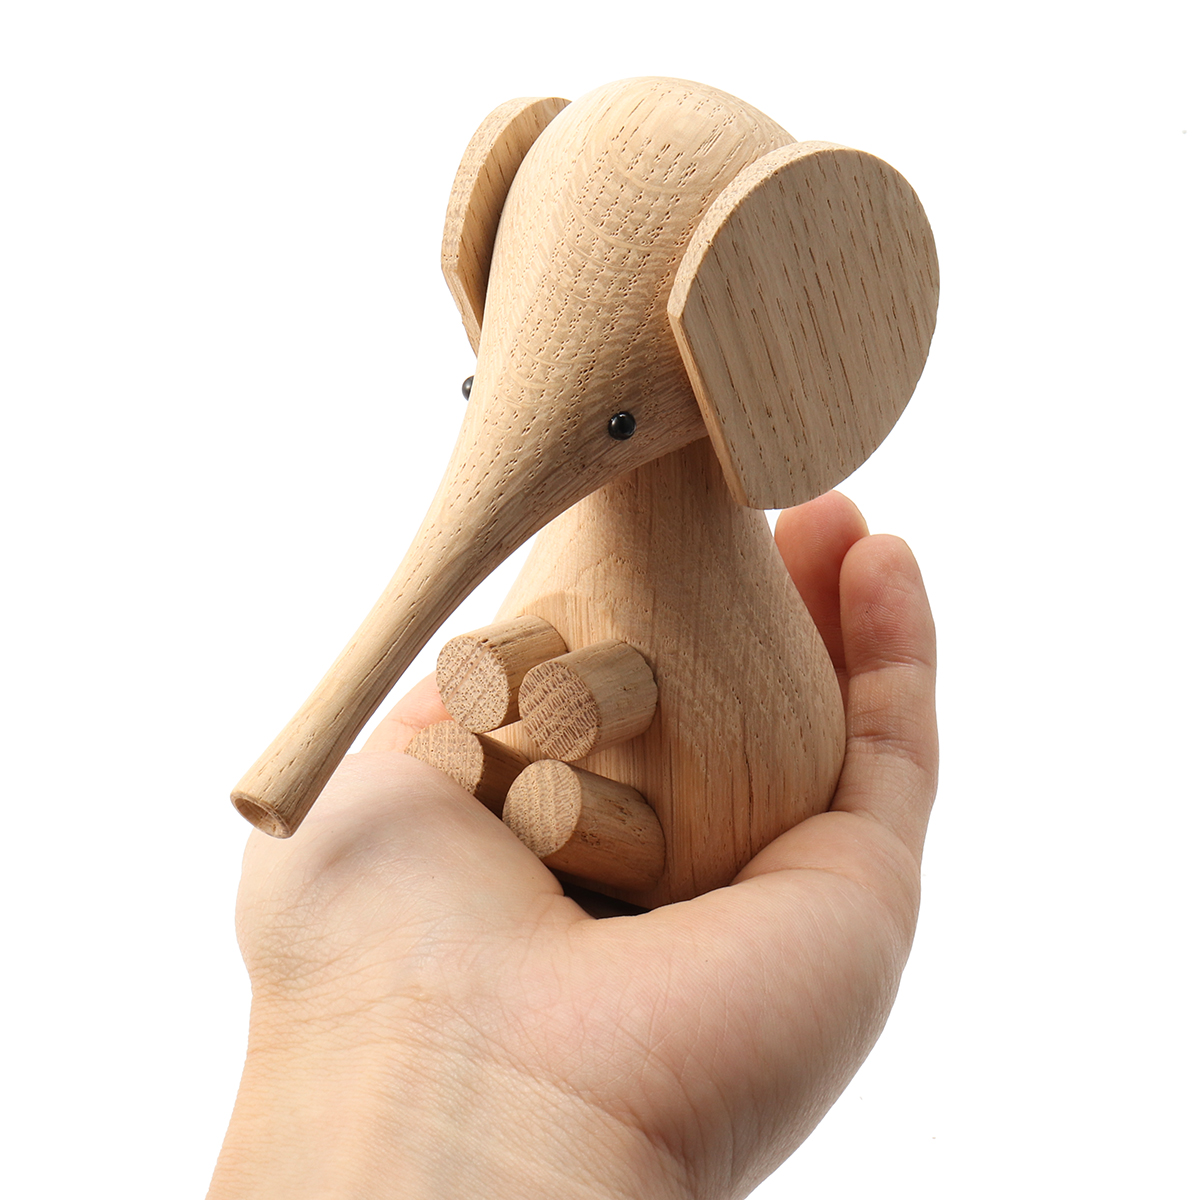 Adjustable-Handicraft-Elephant-Wooden-Animal-Doll-Smooth-Surface-Home-Decorations-Gift-1640775-8